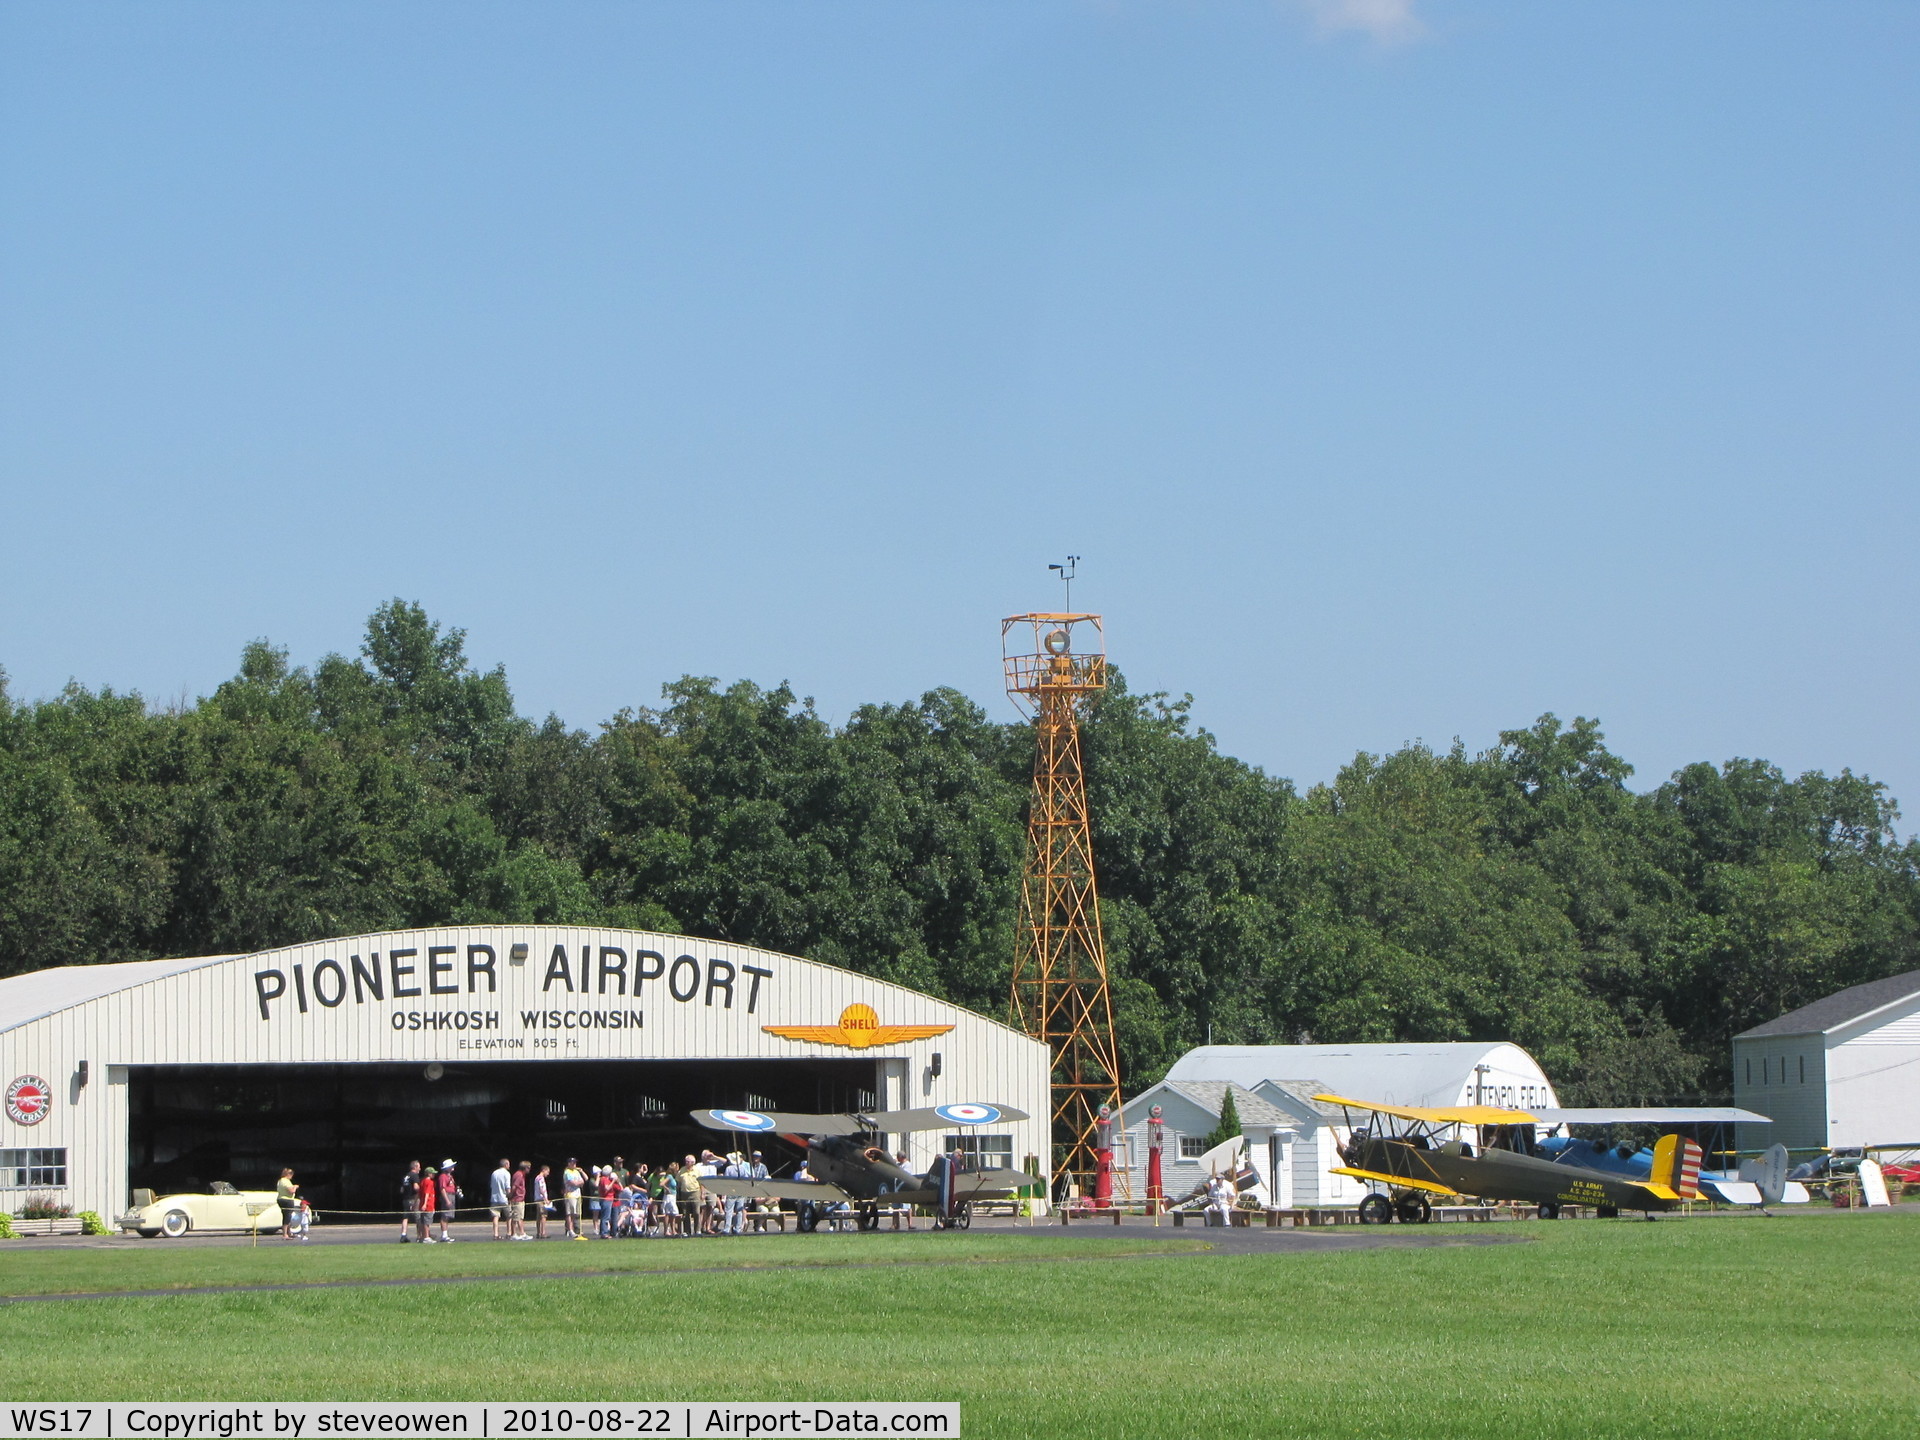 Pioneer Airport (WS17) - The Pioneer Airport part of the EAA Museum complex @ Oshkosh WI USA